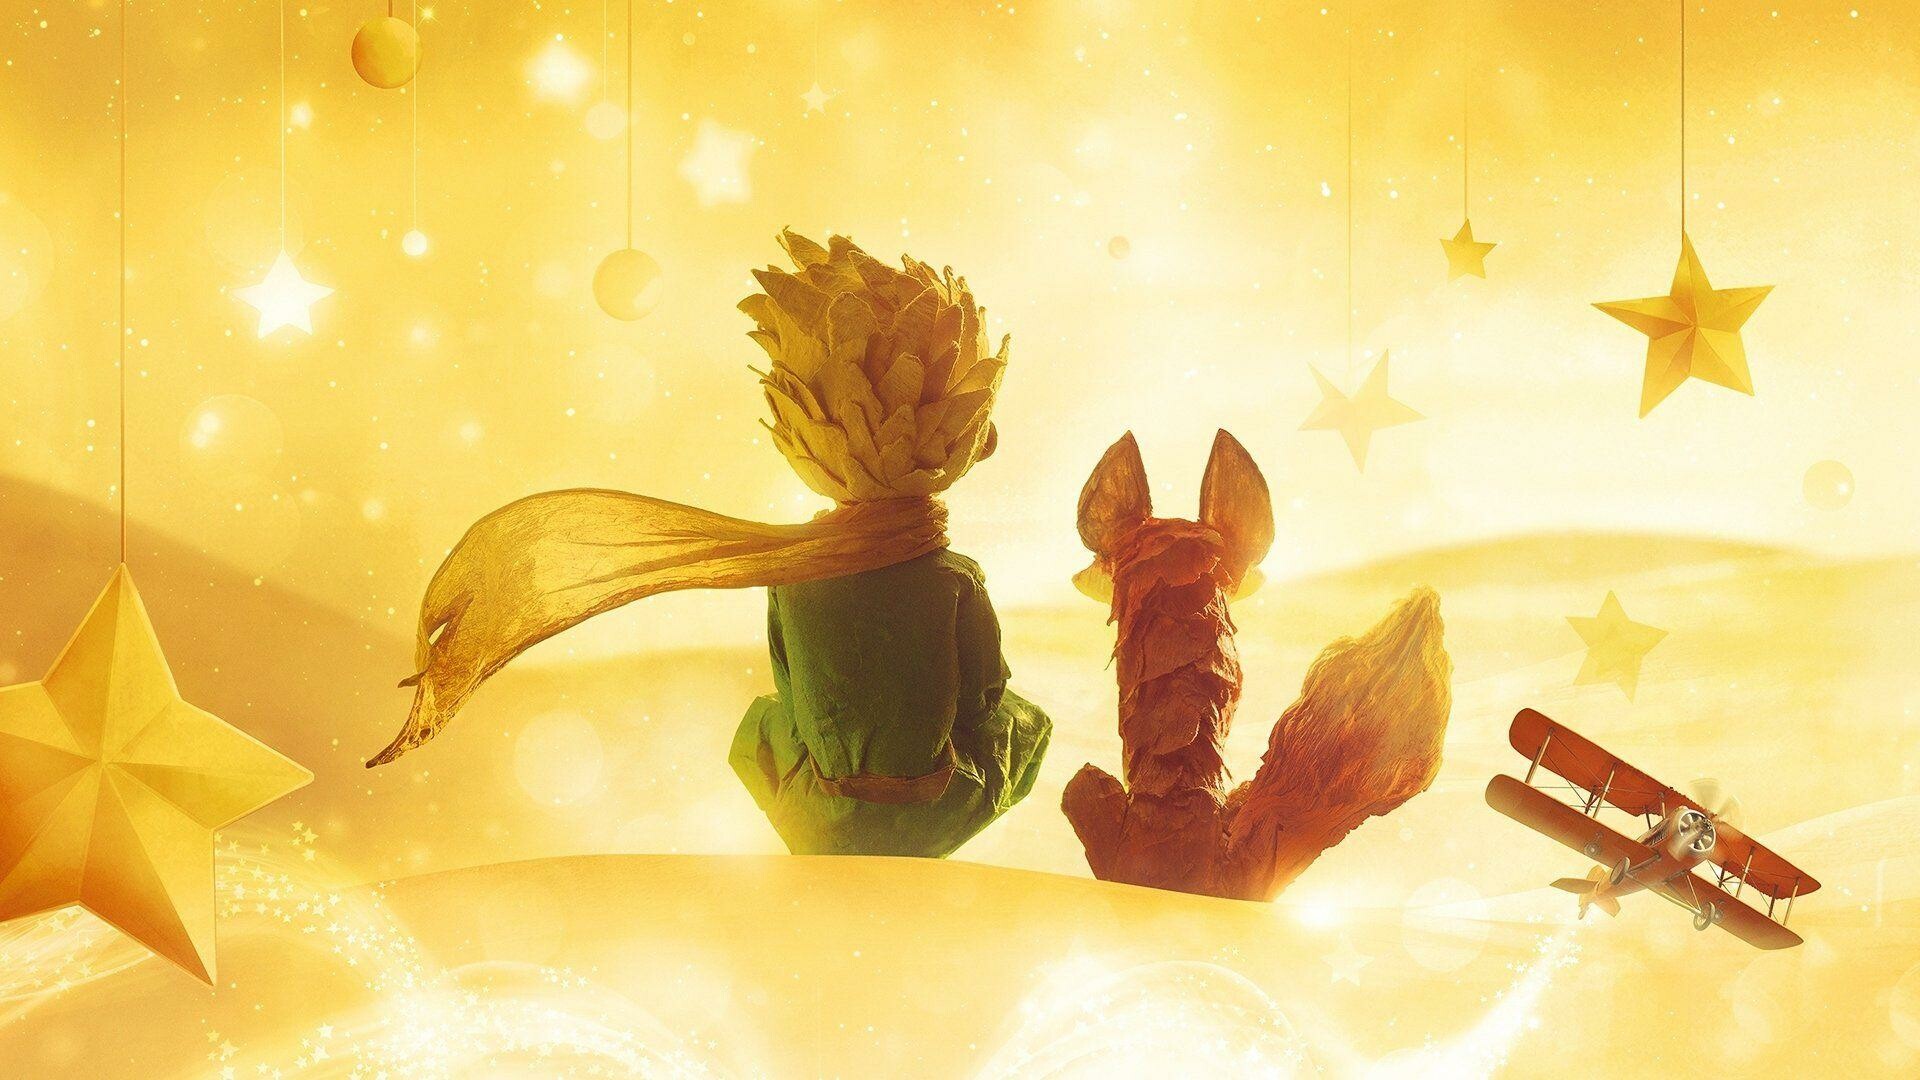 The Little Prince: This Netflix original movie makes a conventional animated film out of Antoine de Saint-Exupery's mysterious novella. 1920x1080 Full HD Background.